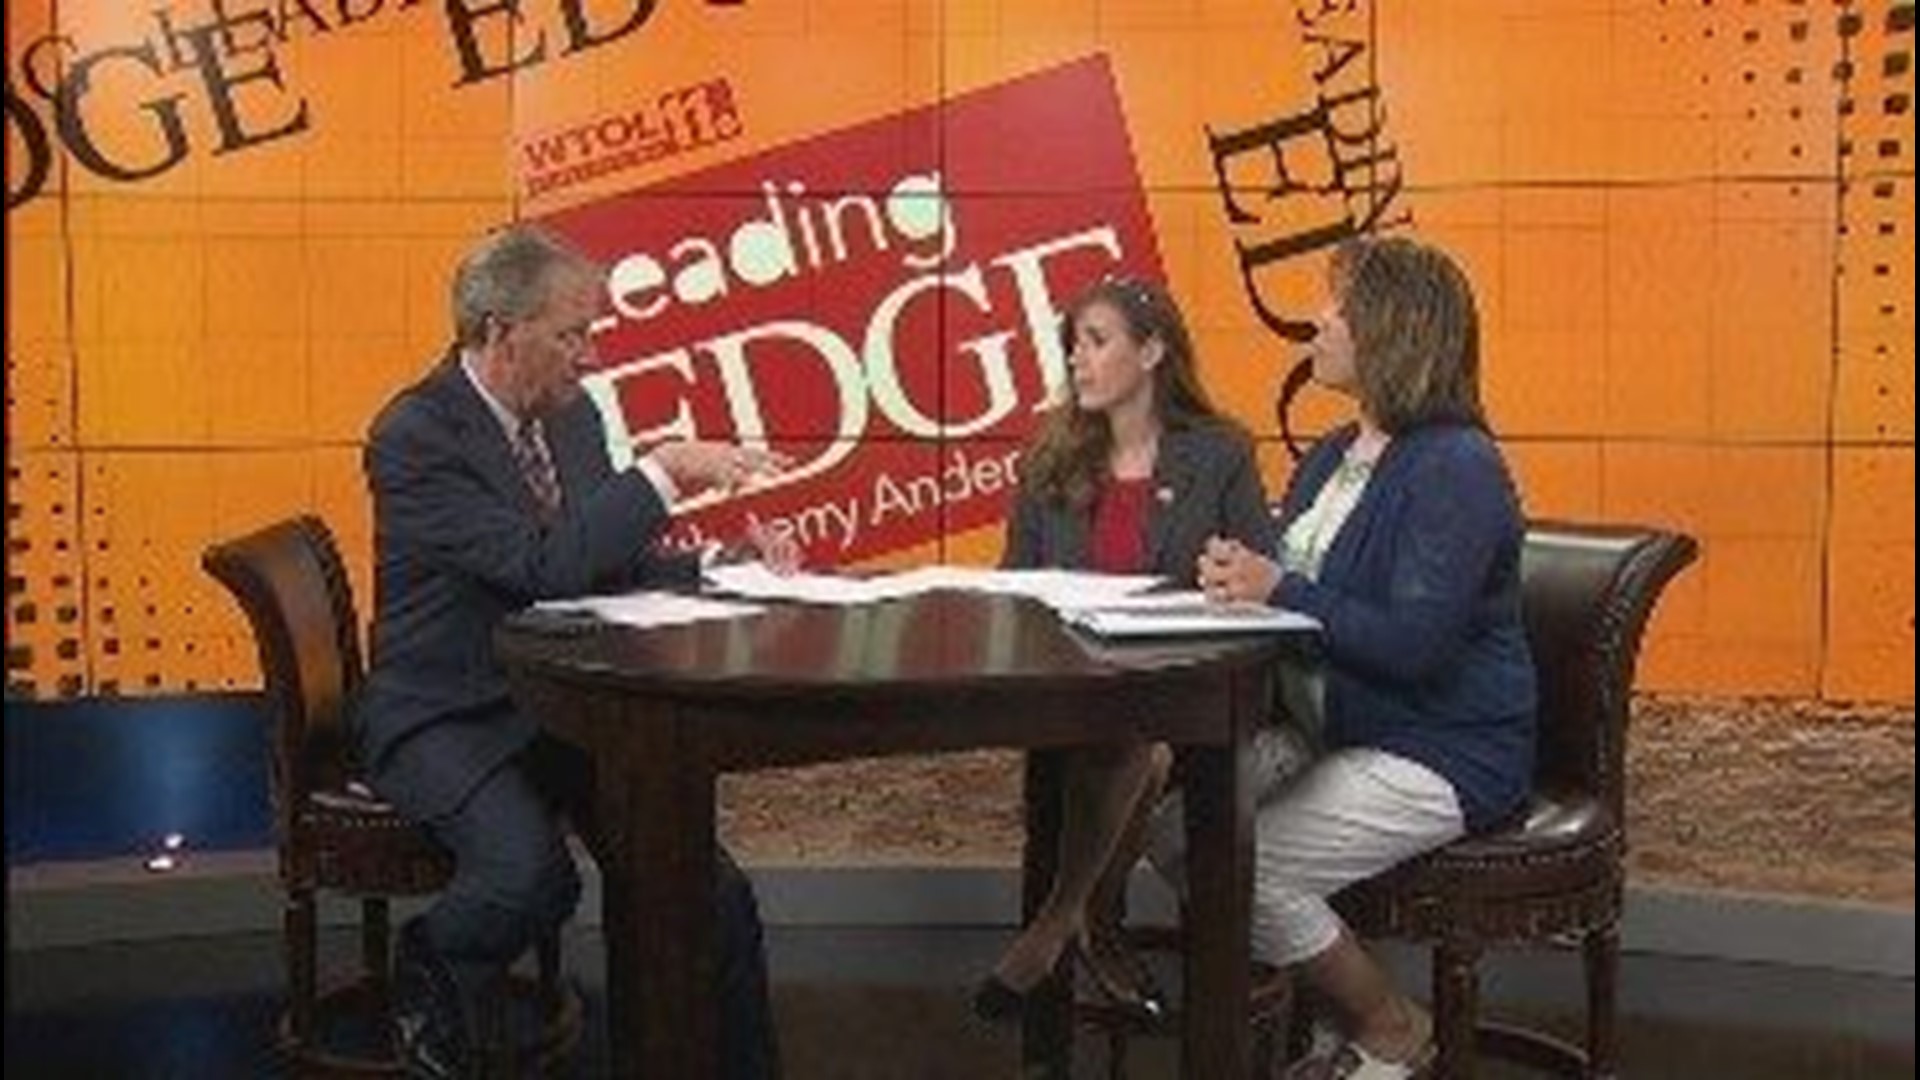 April 23: Leading Edge with Jerry Anderson - Segment 3